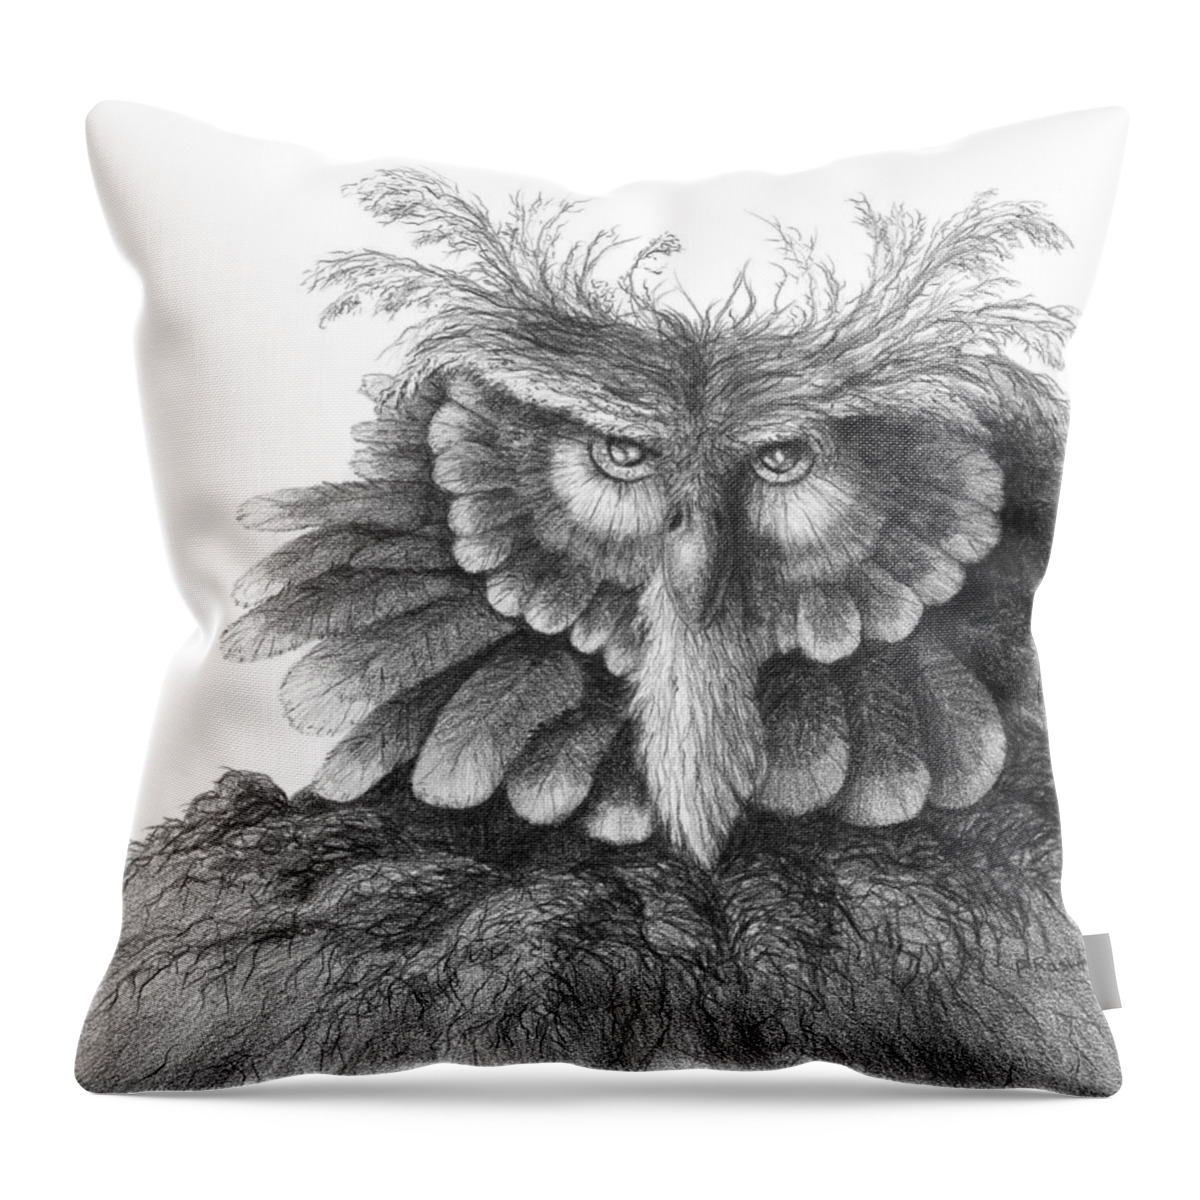 Owl Throw Pillow featuring the painting Wise Likeness by Peter Rashford